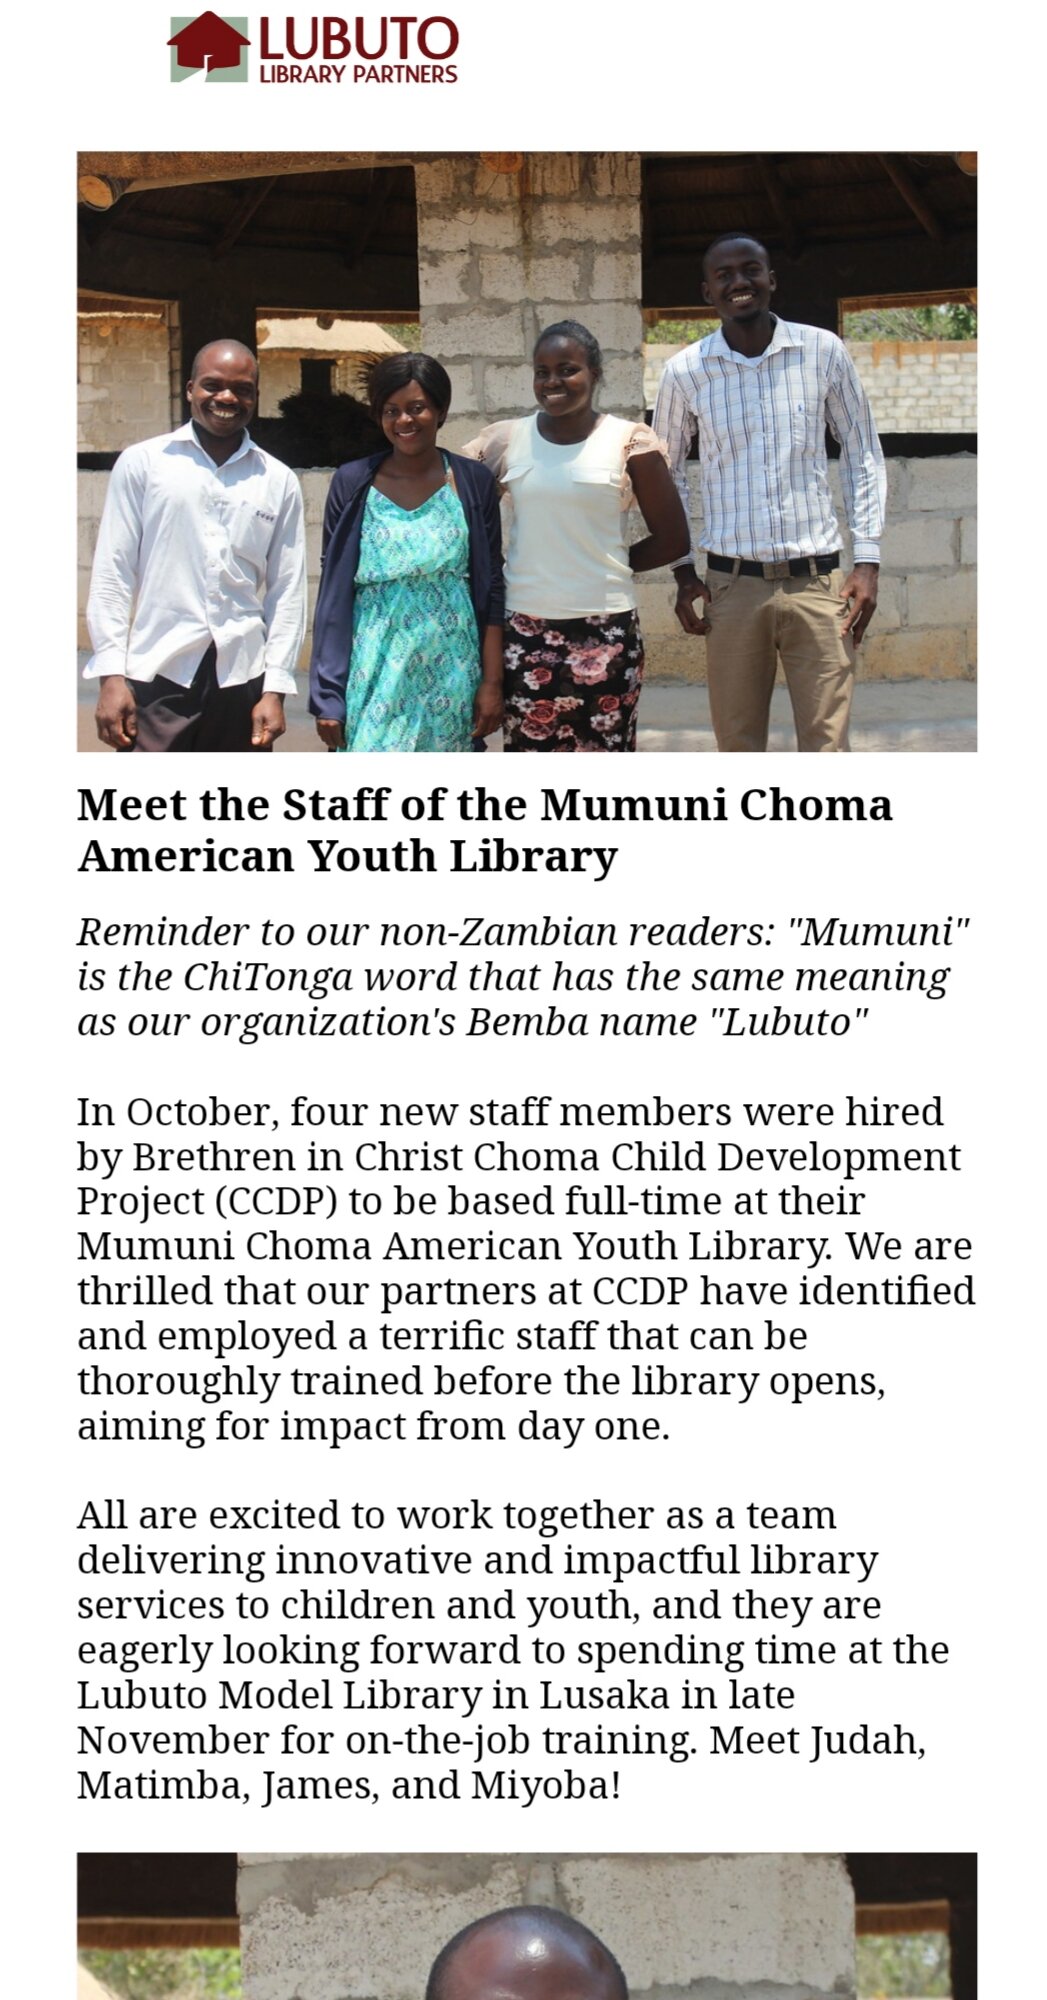 Meet the Staff of the Mumuni Choma American Youth Library